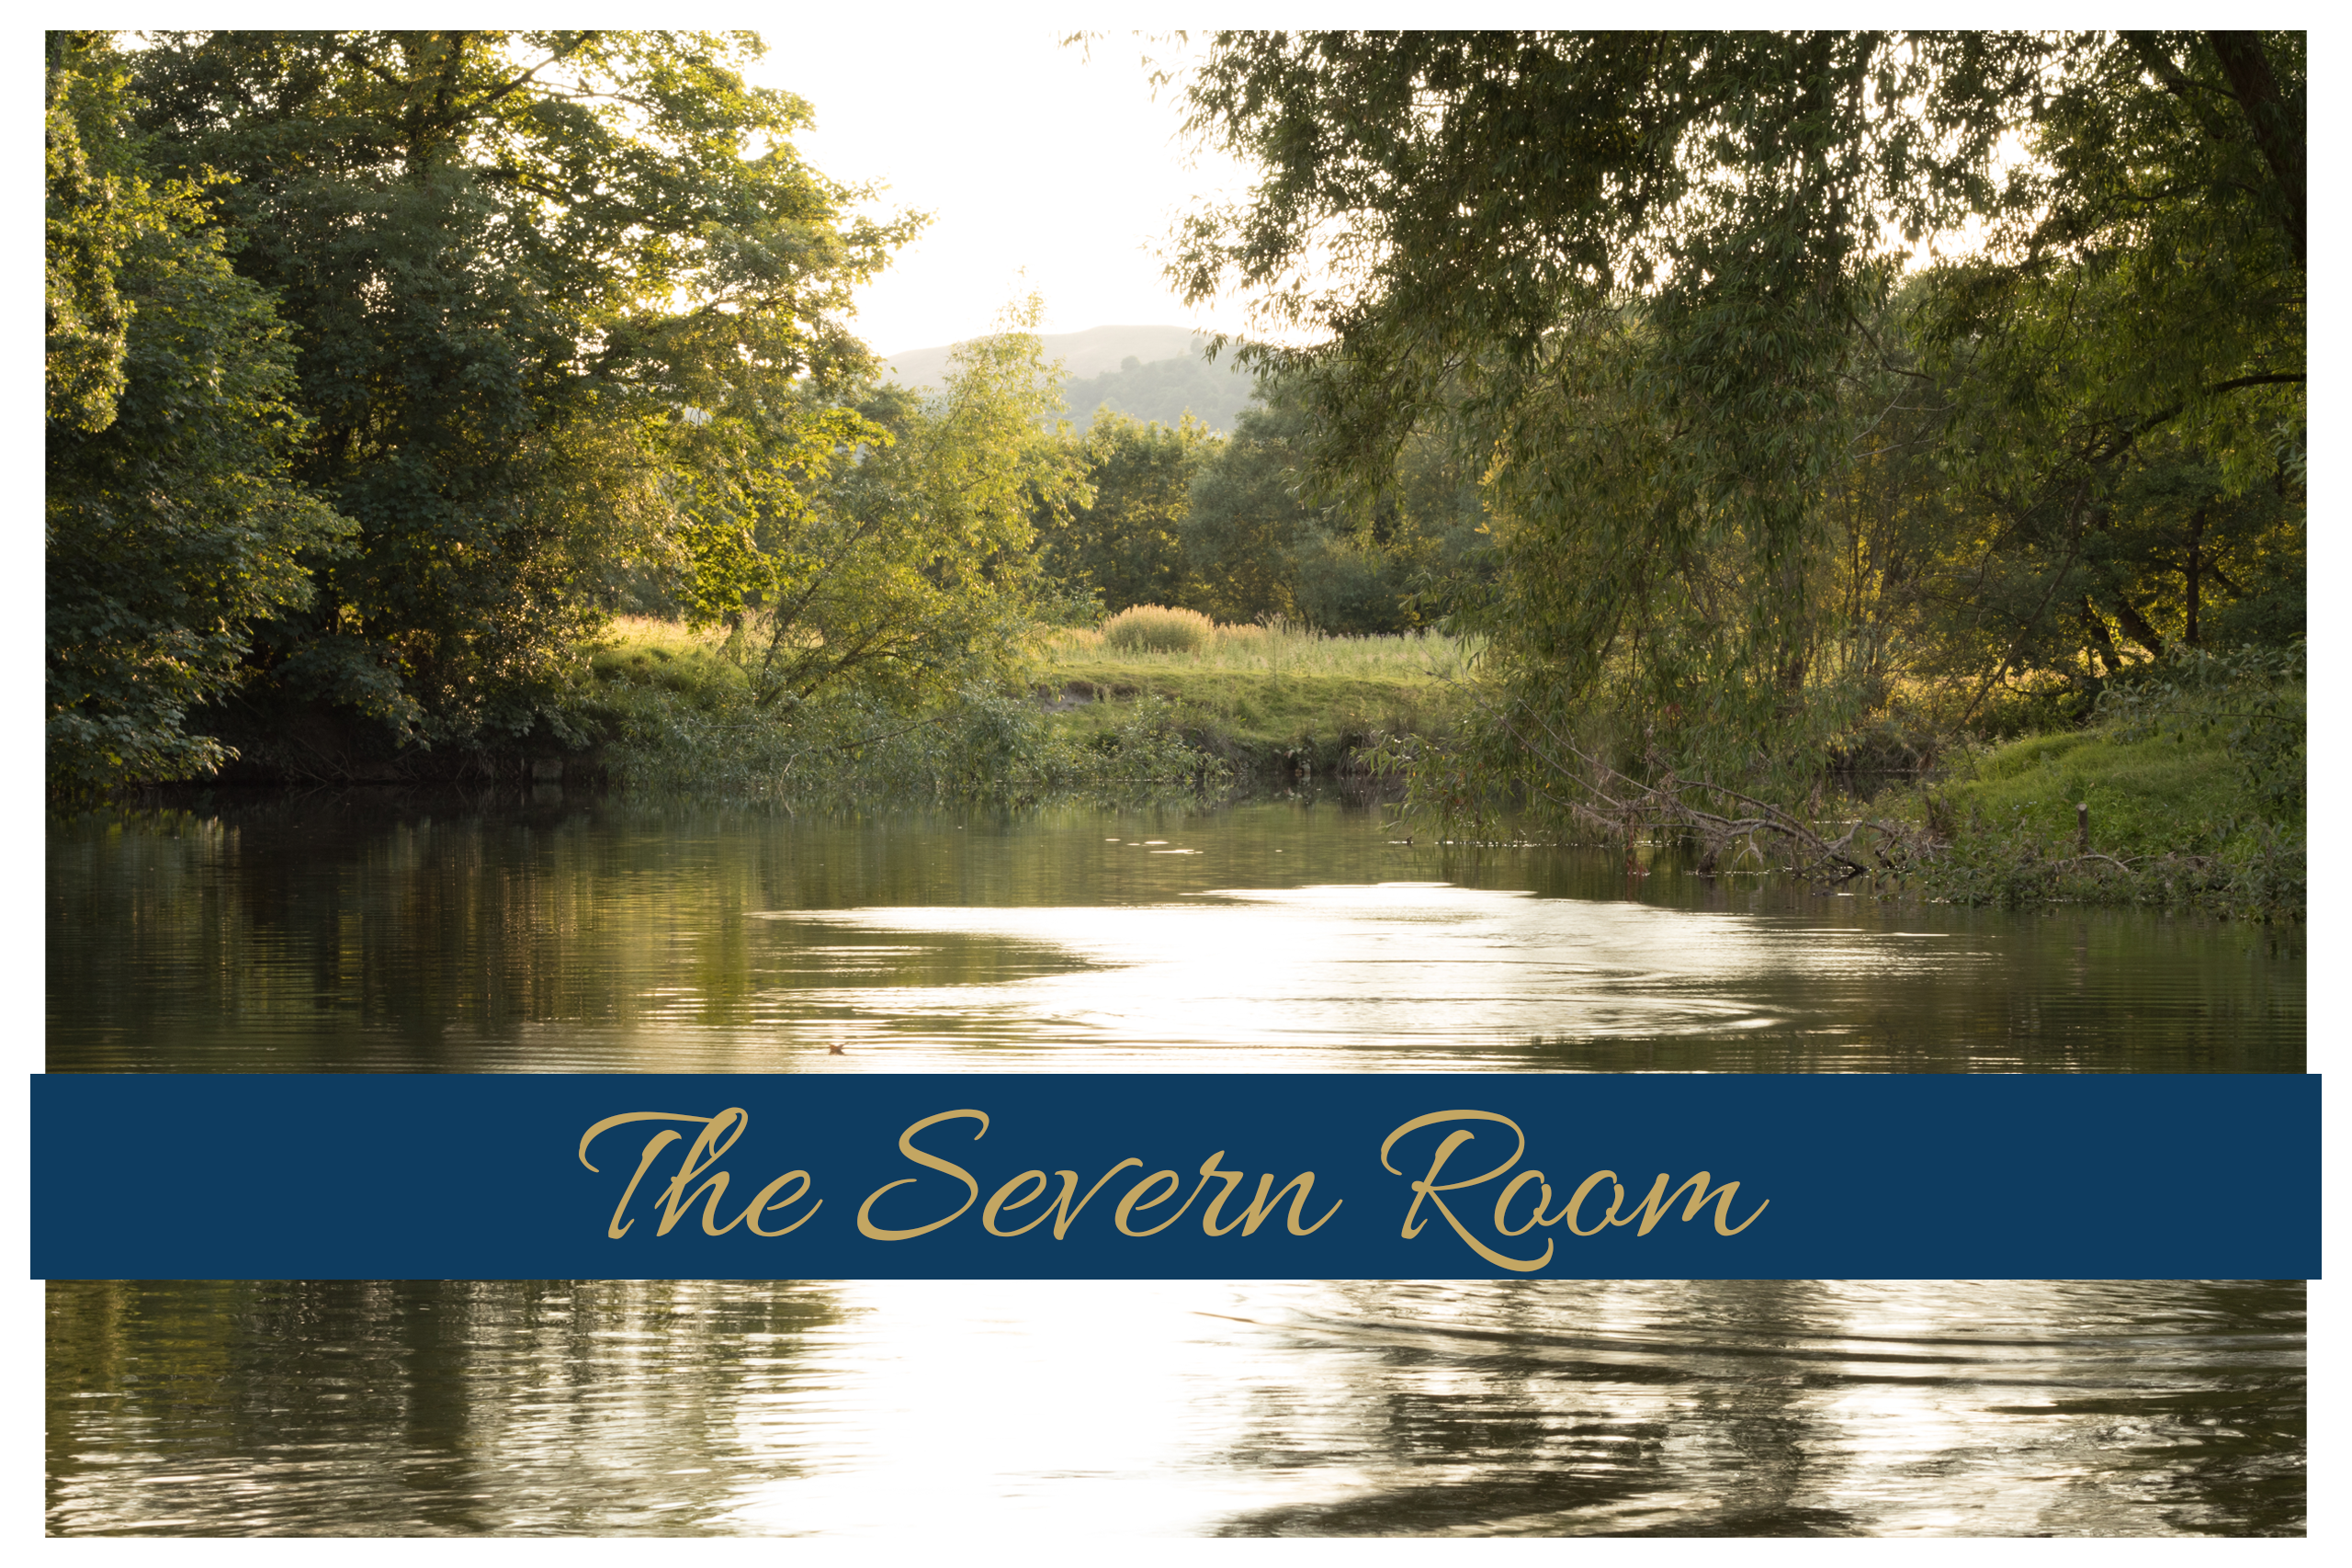 The Severn Room 